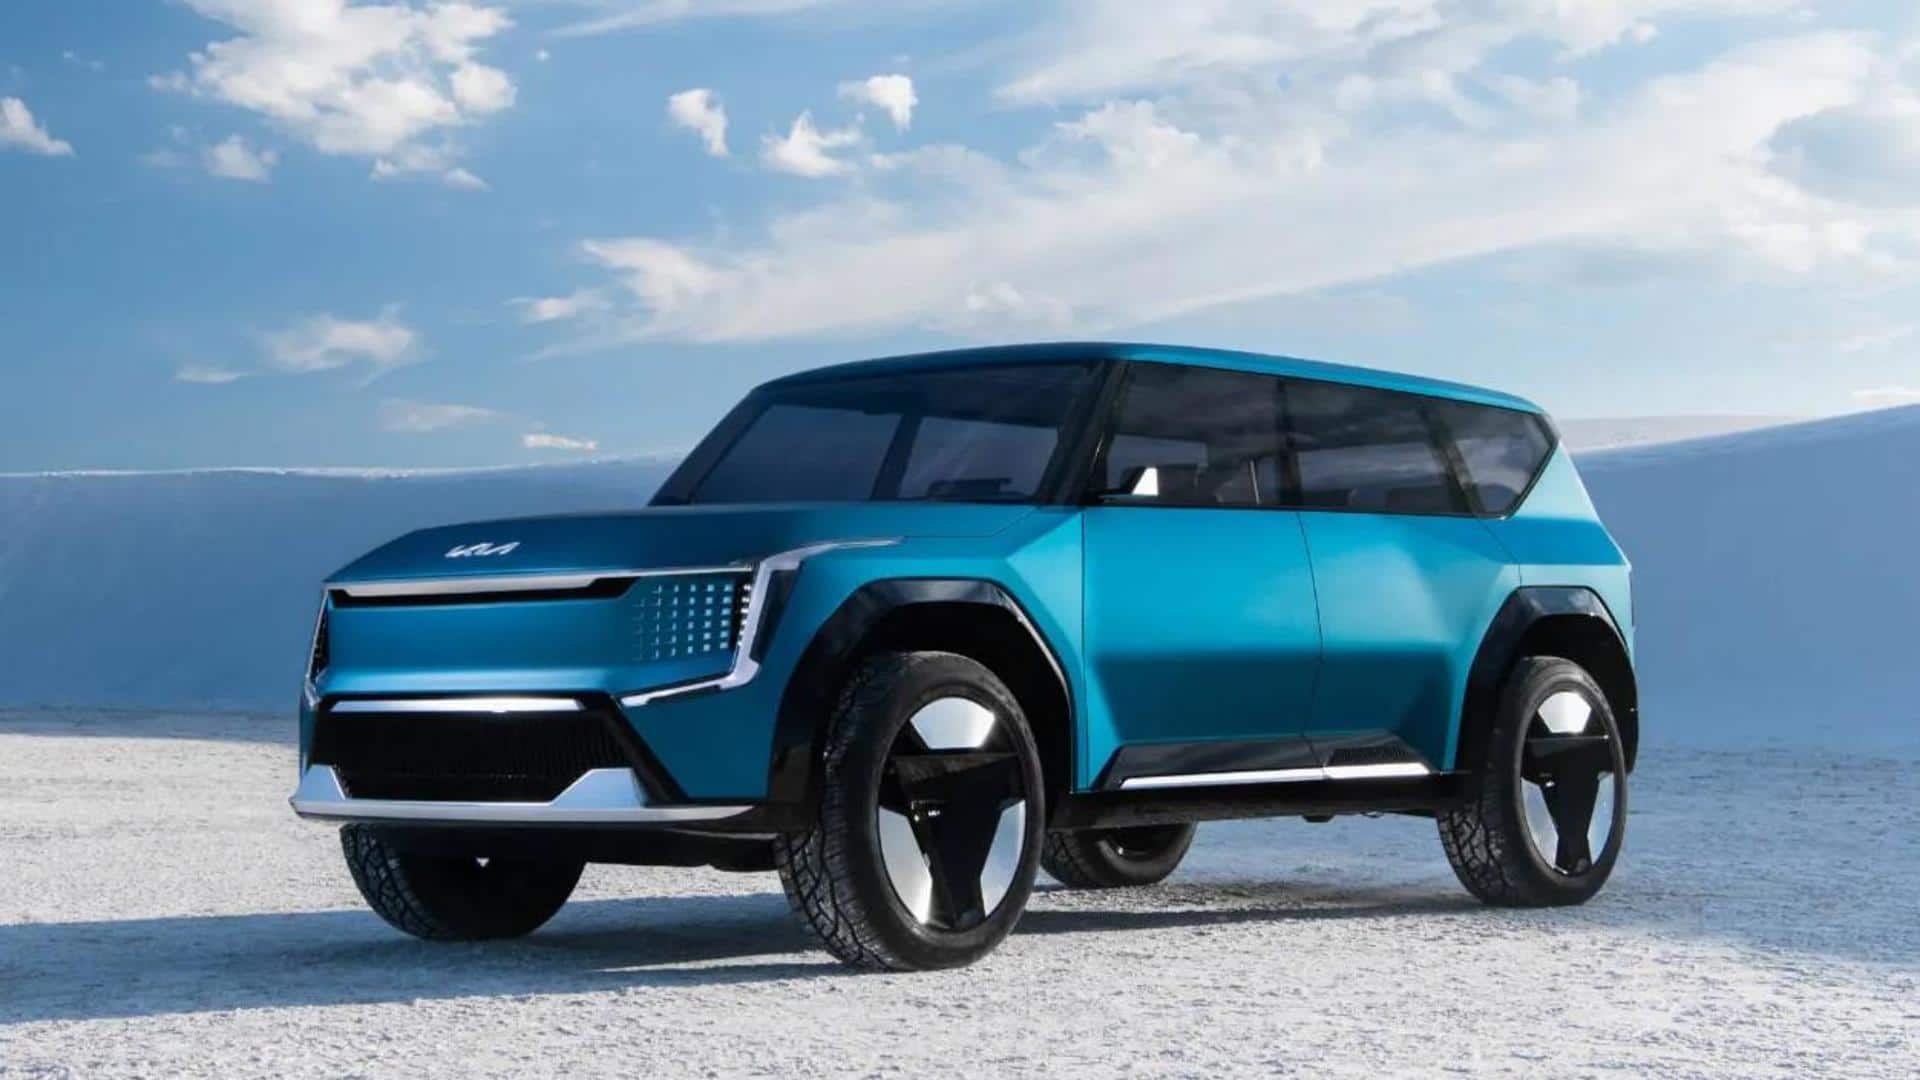 Kia EV9 SUV's global debut in March: What to expect